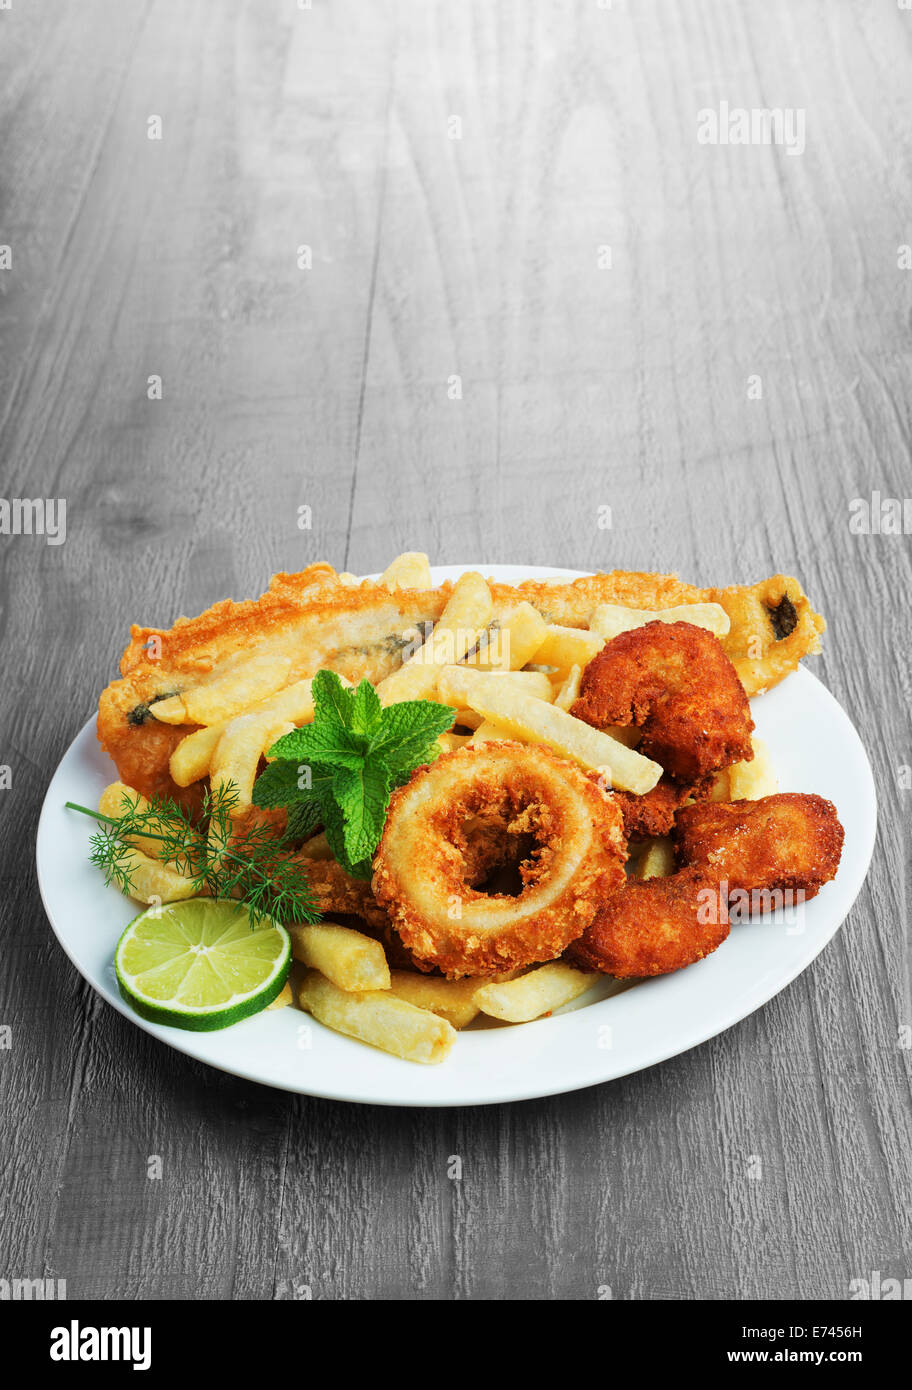 Seafood dish with crumbed fish,calamari,prawn and potato chips on vintage table Stock Photo